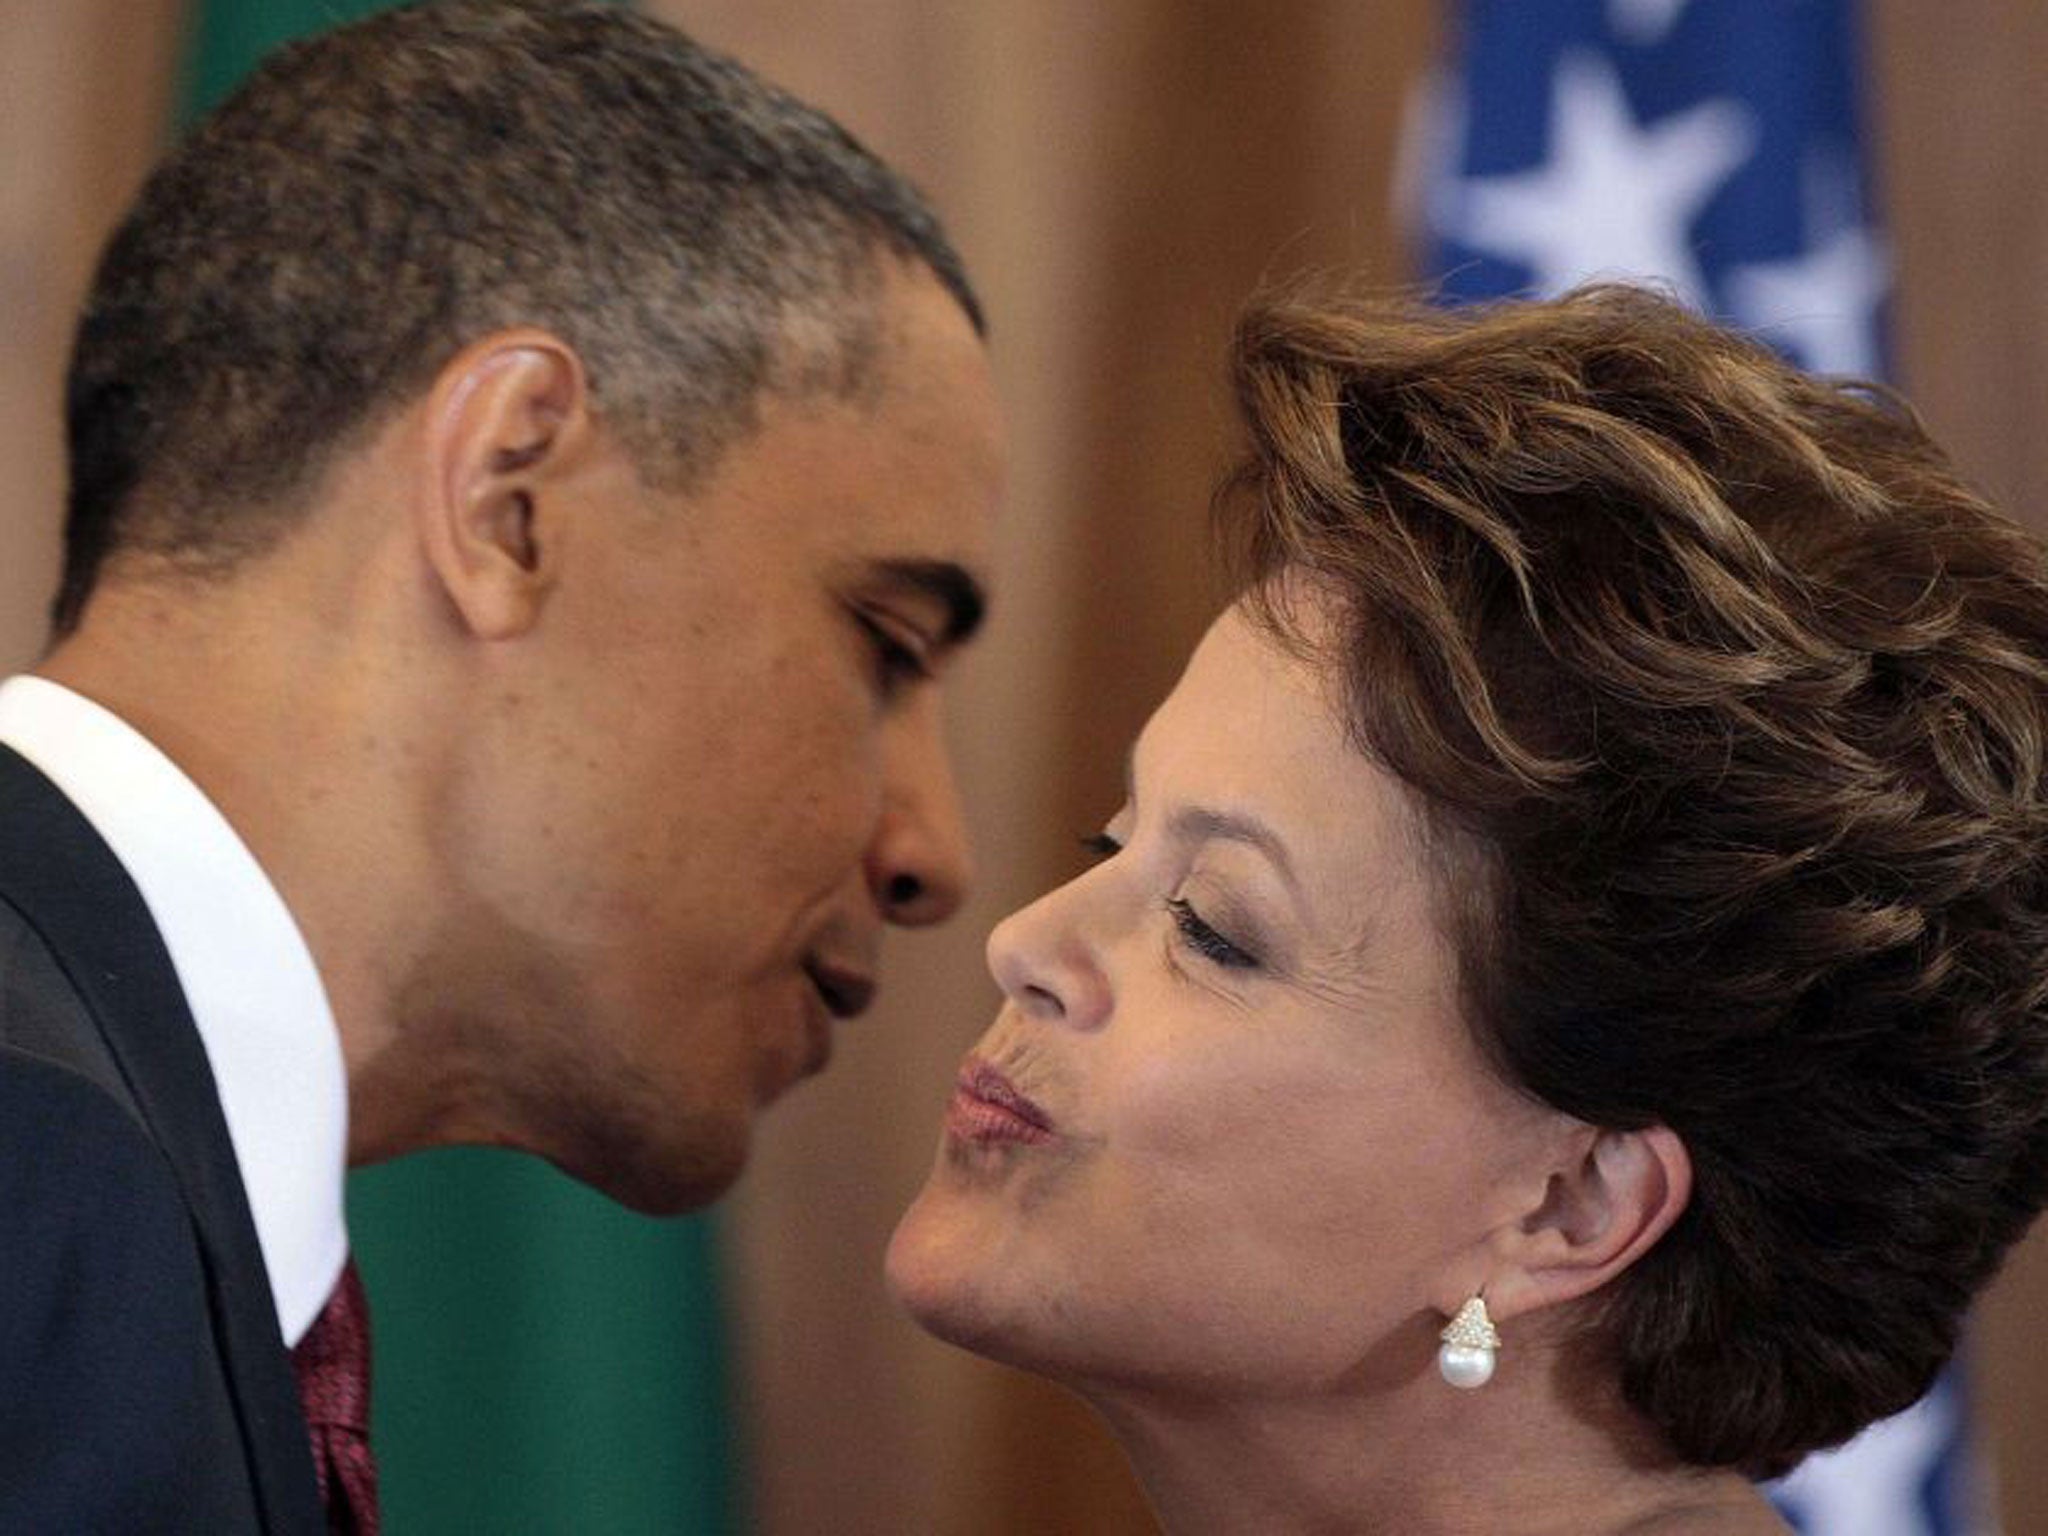 US President Barack Obama and Brazilian President Dilma Rousseff greet each other during a joint press conference at Planalto Palace in Brasilia, on March 19, 2011. The US ambassador to Brazil, Thomas Shannon, was summoned by authorities on 2 September 2013 over new allegations that the US National Security Agency spied on President Dilma Rousseff, an official said.